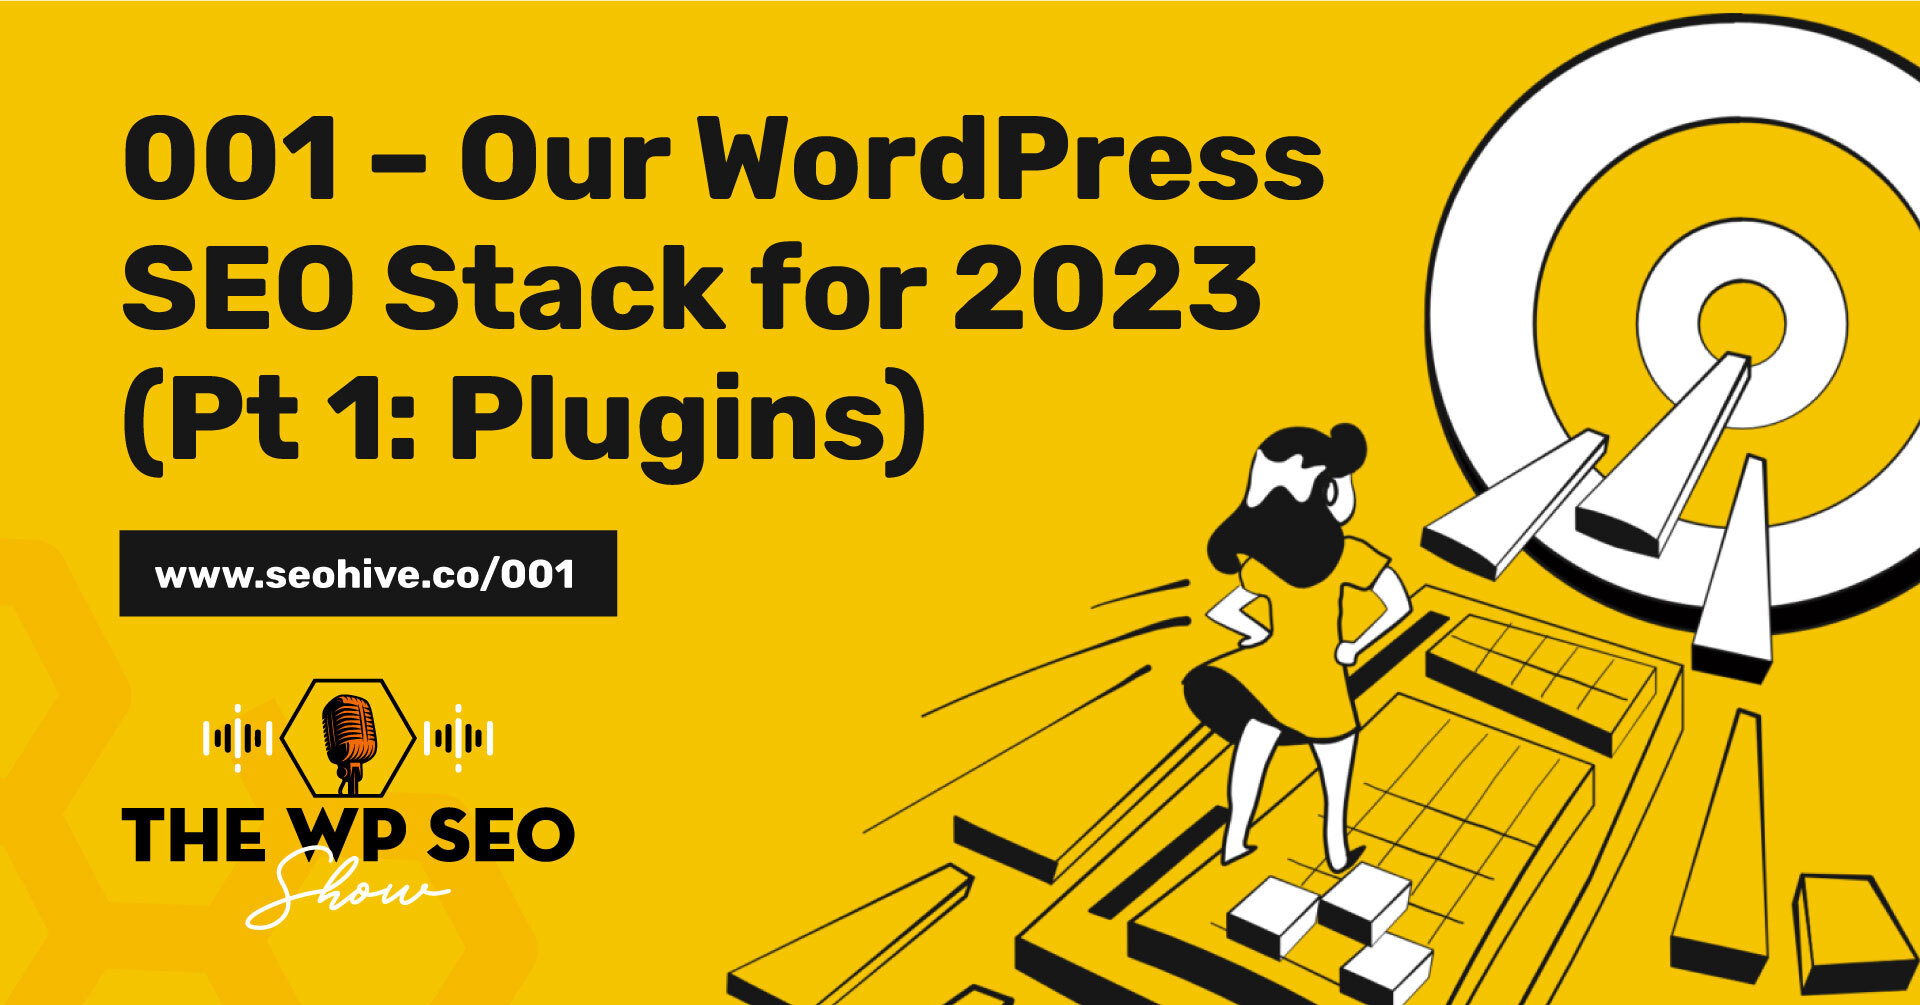 001 – Our WordPress SEO Stack for 2023 (Pt 1: Plugins)